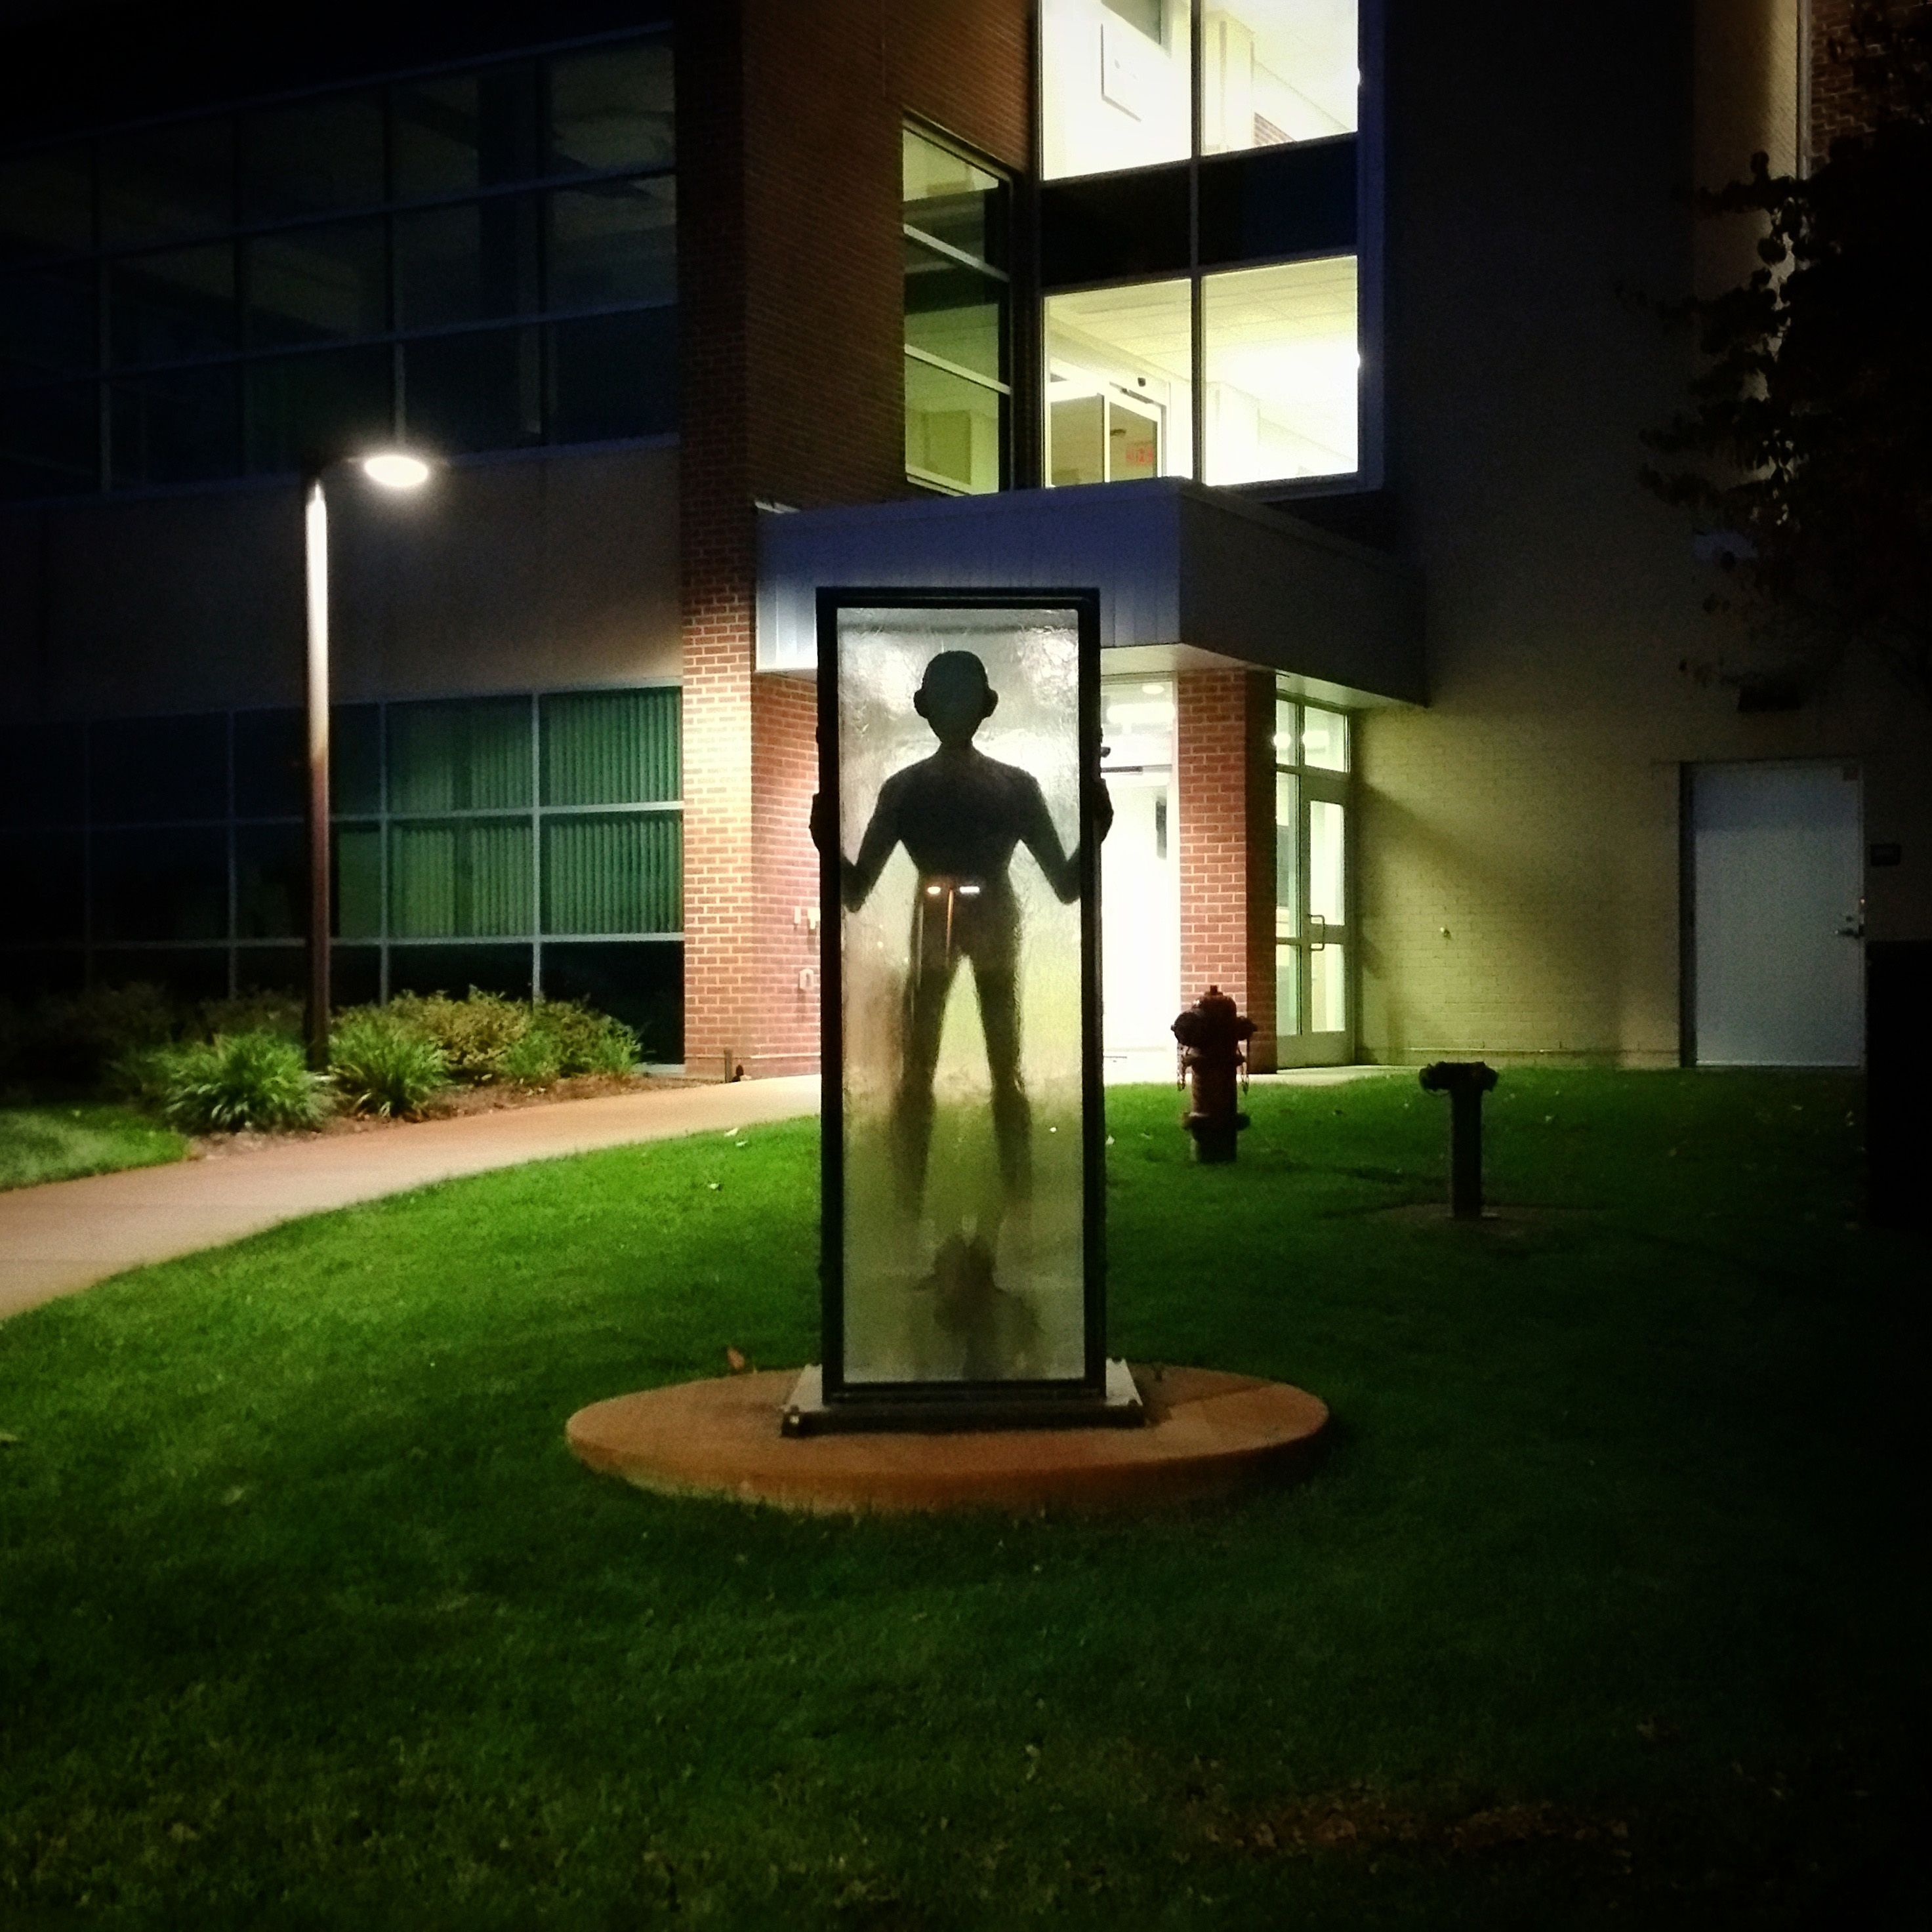 The statues on campus get 100 times creepier in the dark